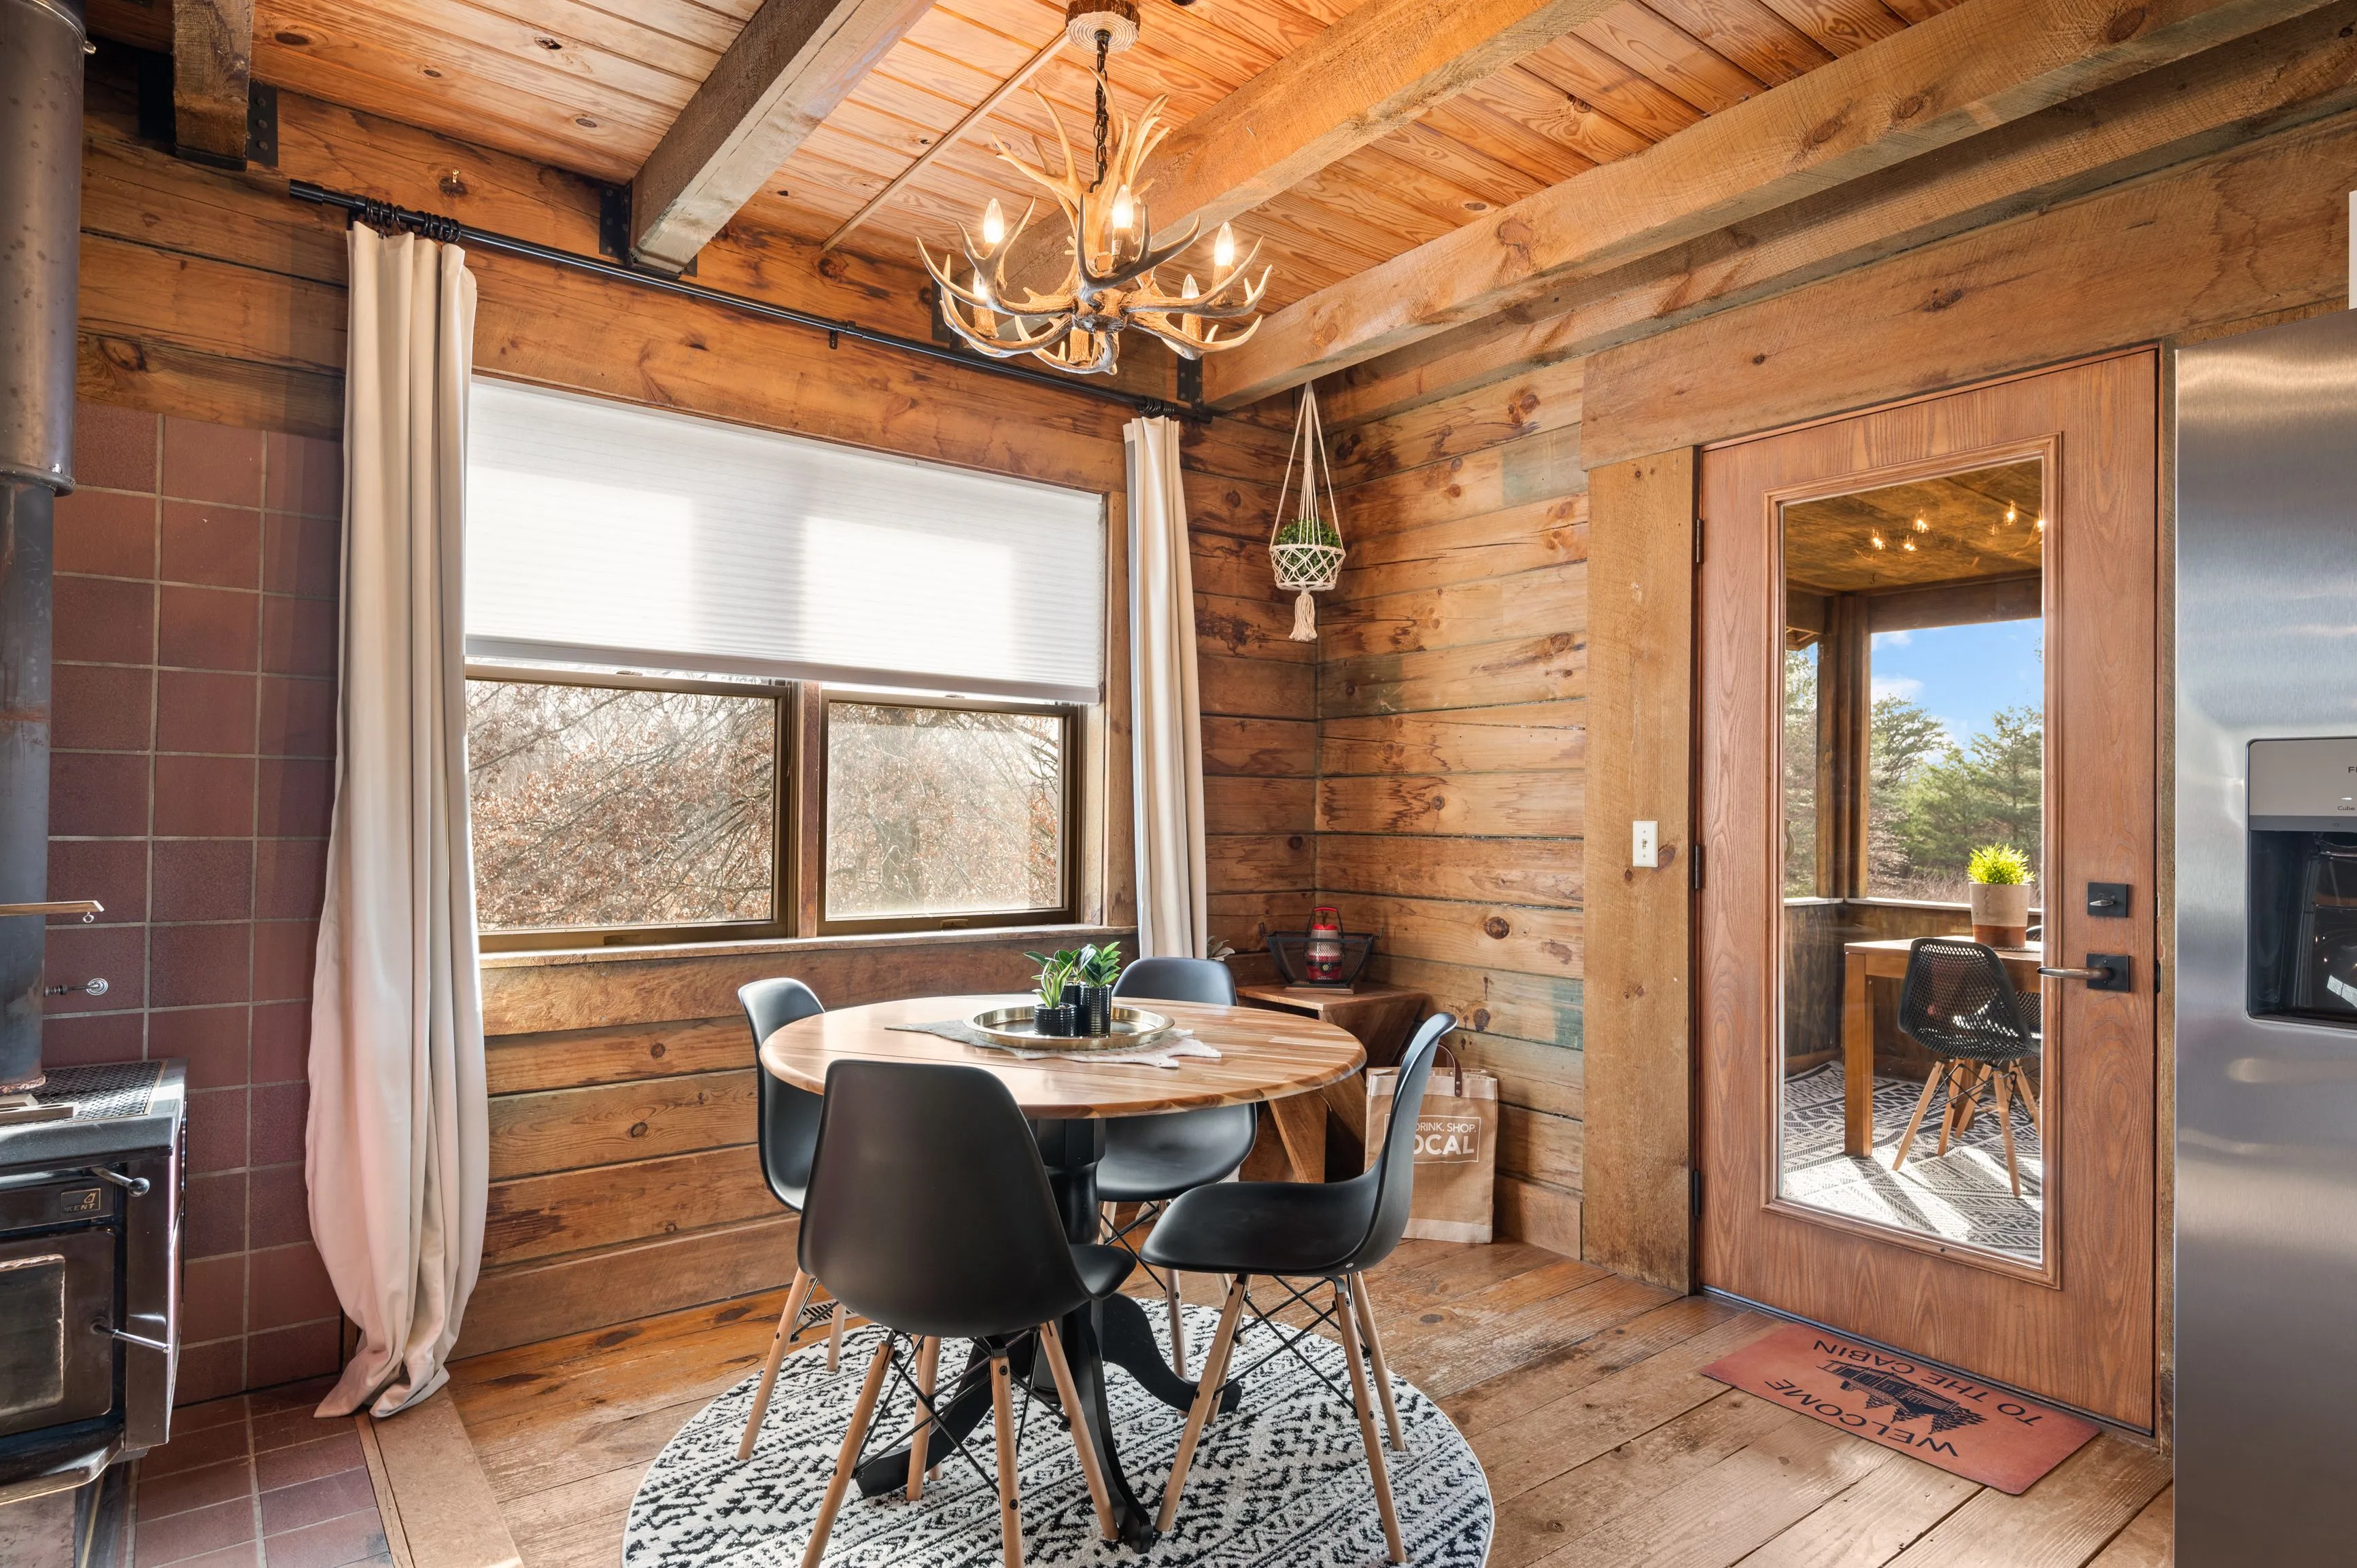 Cozy rustic dining area with a round wooden table, modern chairs, and a chandelier resembling antlers, inside a cabin with wood panel walls and ceiling, adjacent to a kitchen area with large windows providing natural light.